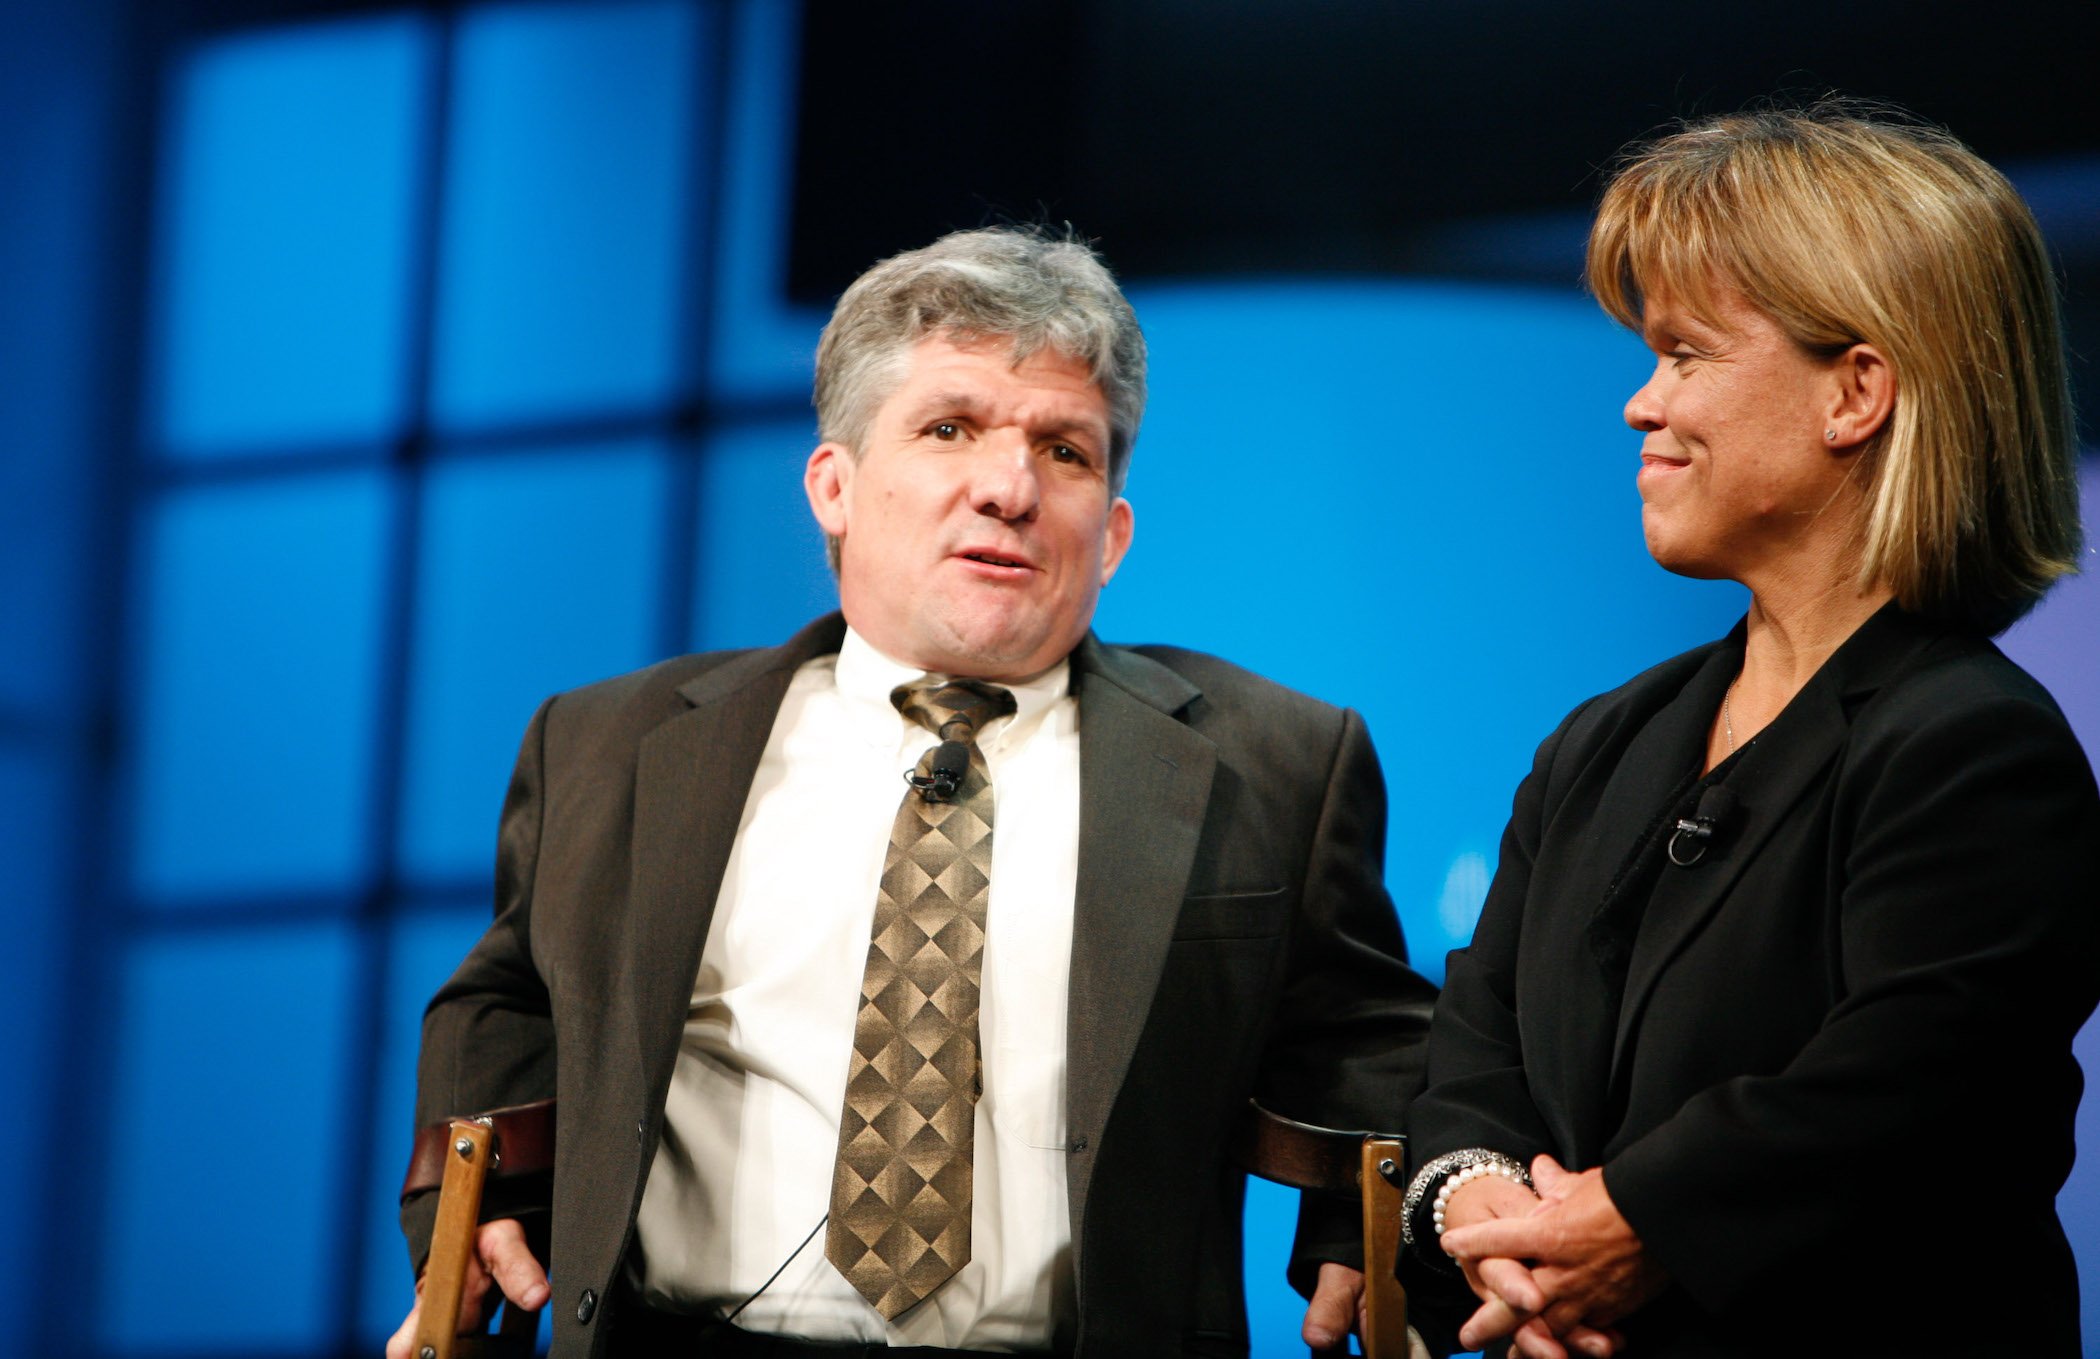 Matt and Amy Roloff, parents of Zach, Jeremy, Molly, and Jacob Roloff, of 'Little People, Big World' standing together against a blue background